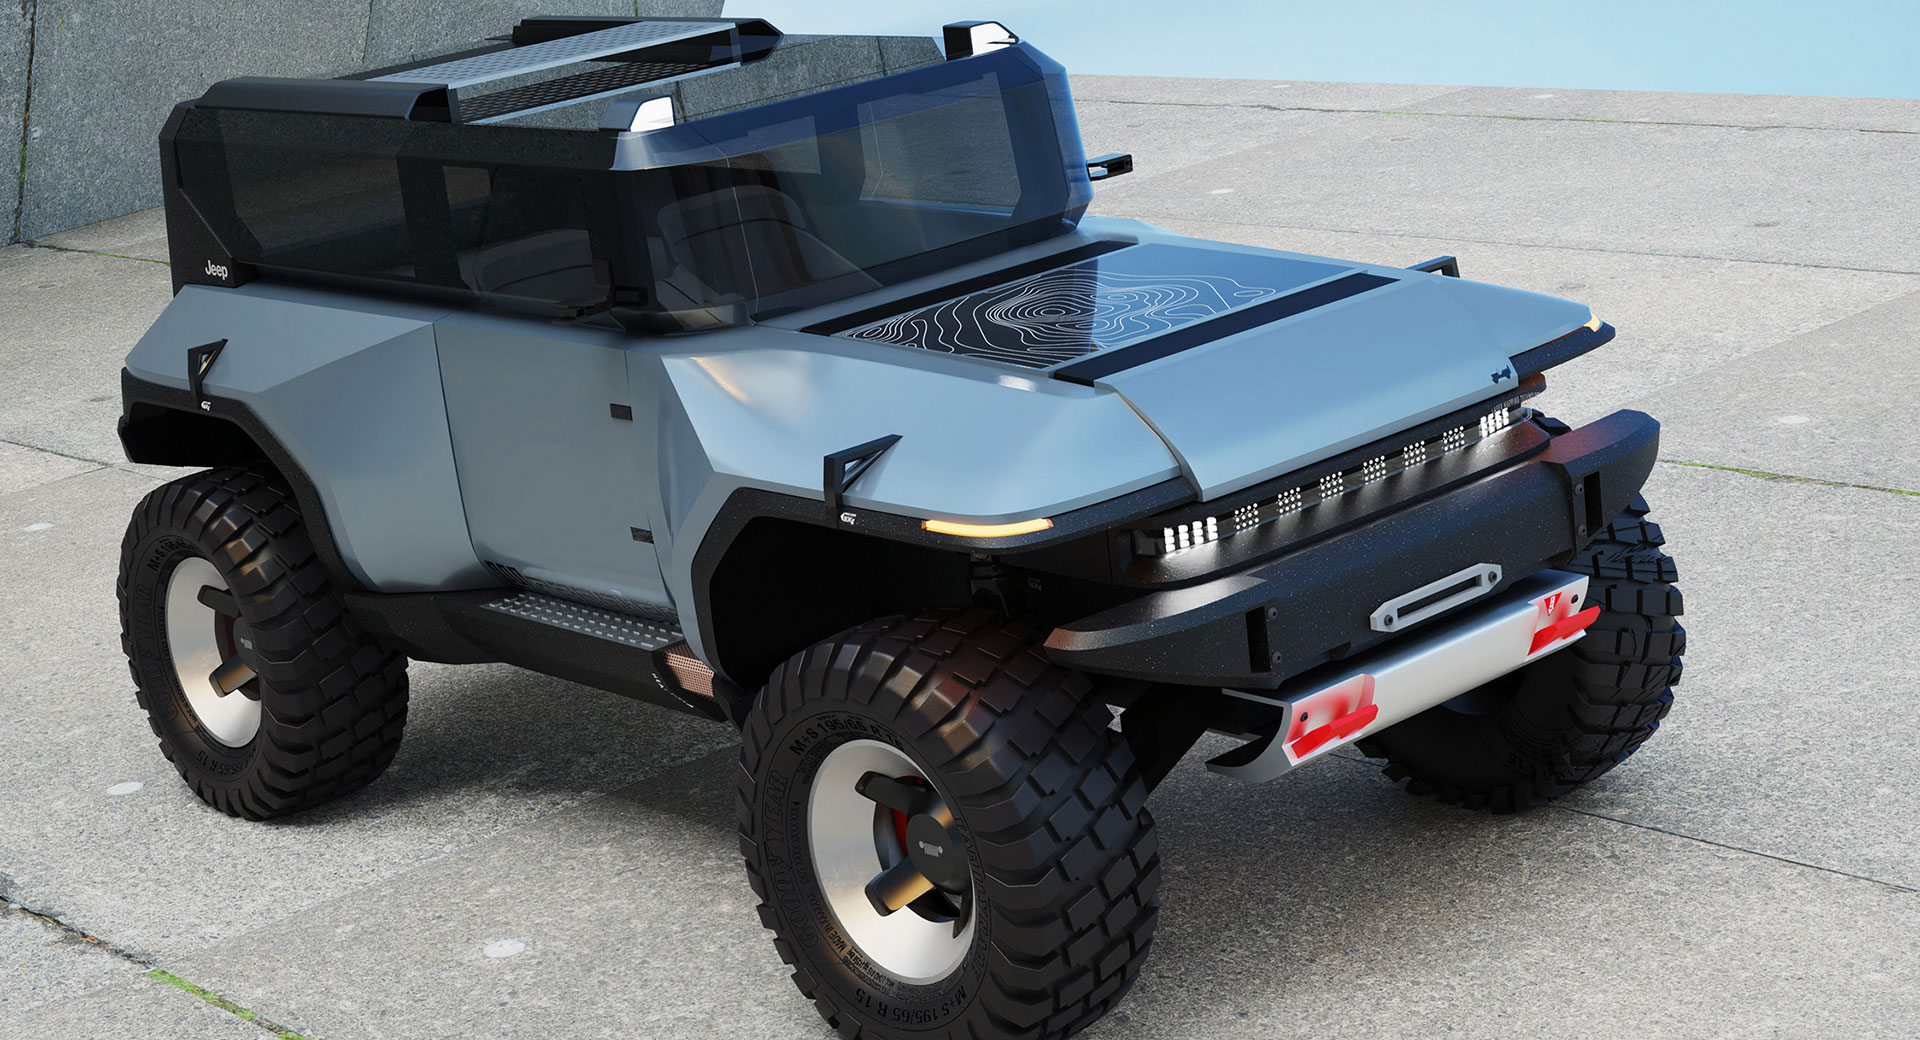 Futuristic Jeep Wrangler Render Looks Like It Came From Another Planet |  Carscoops